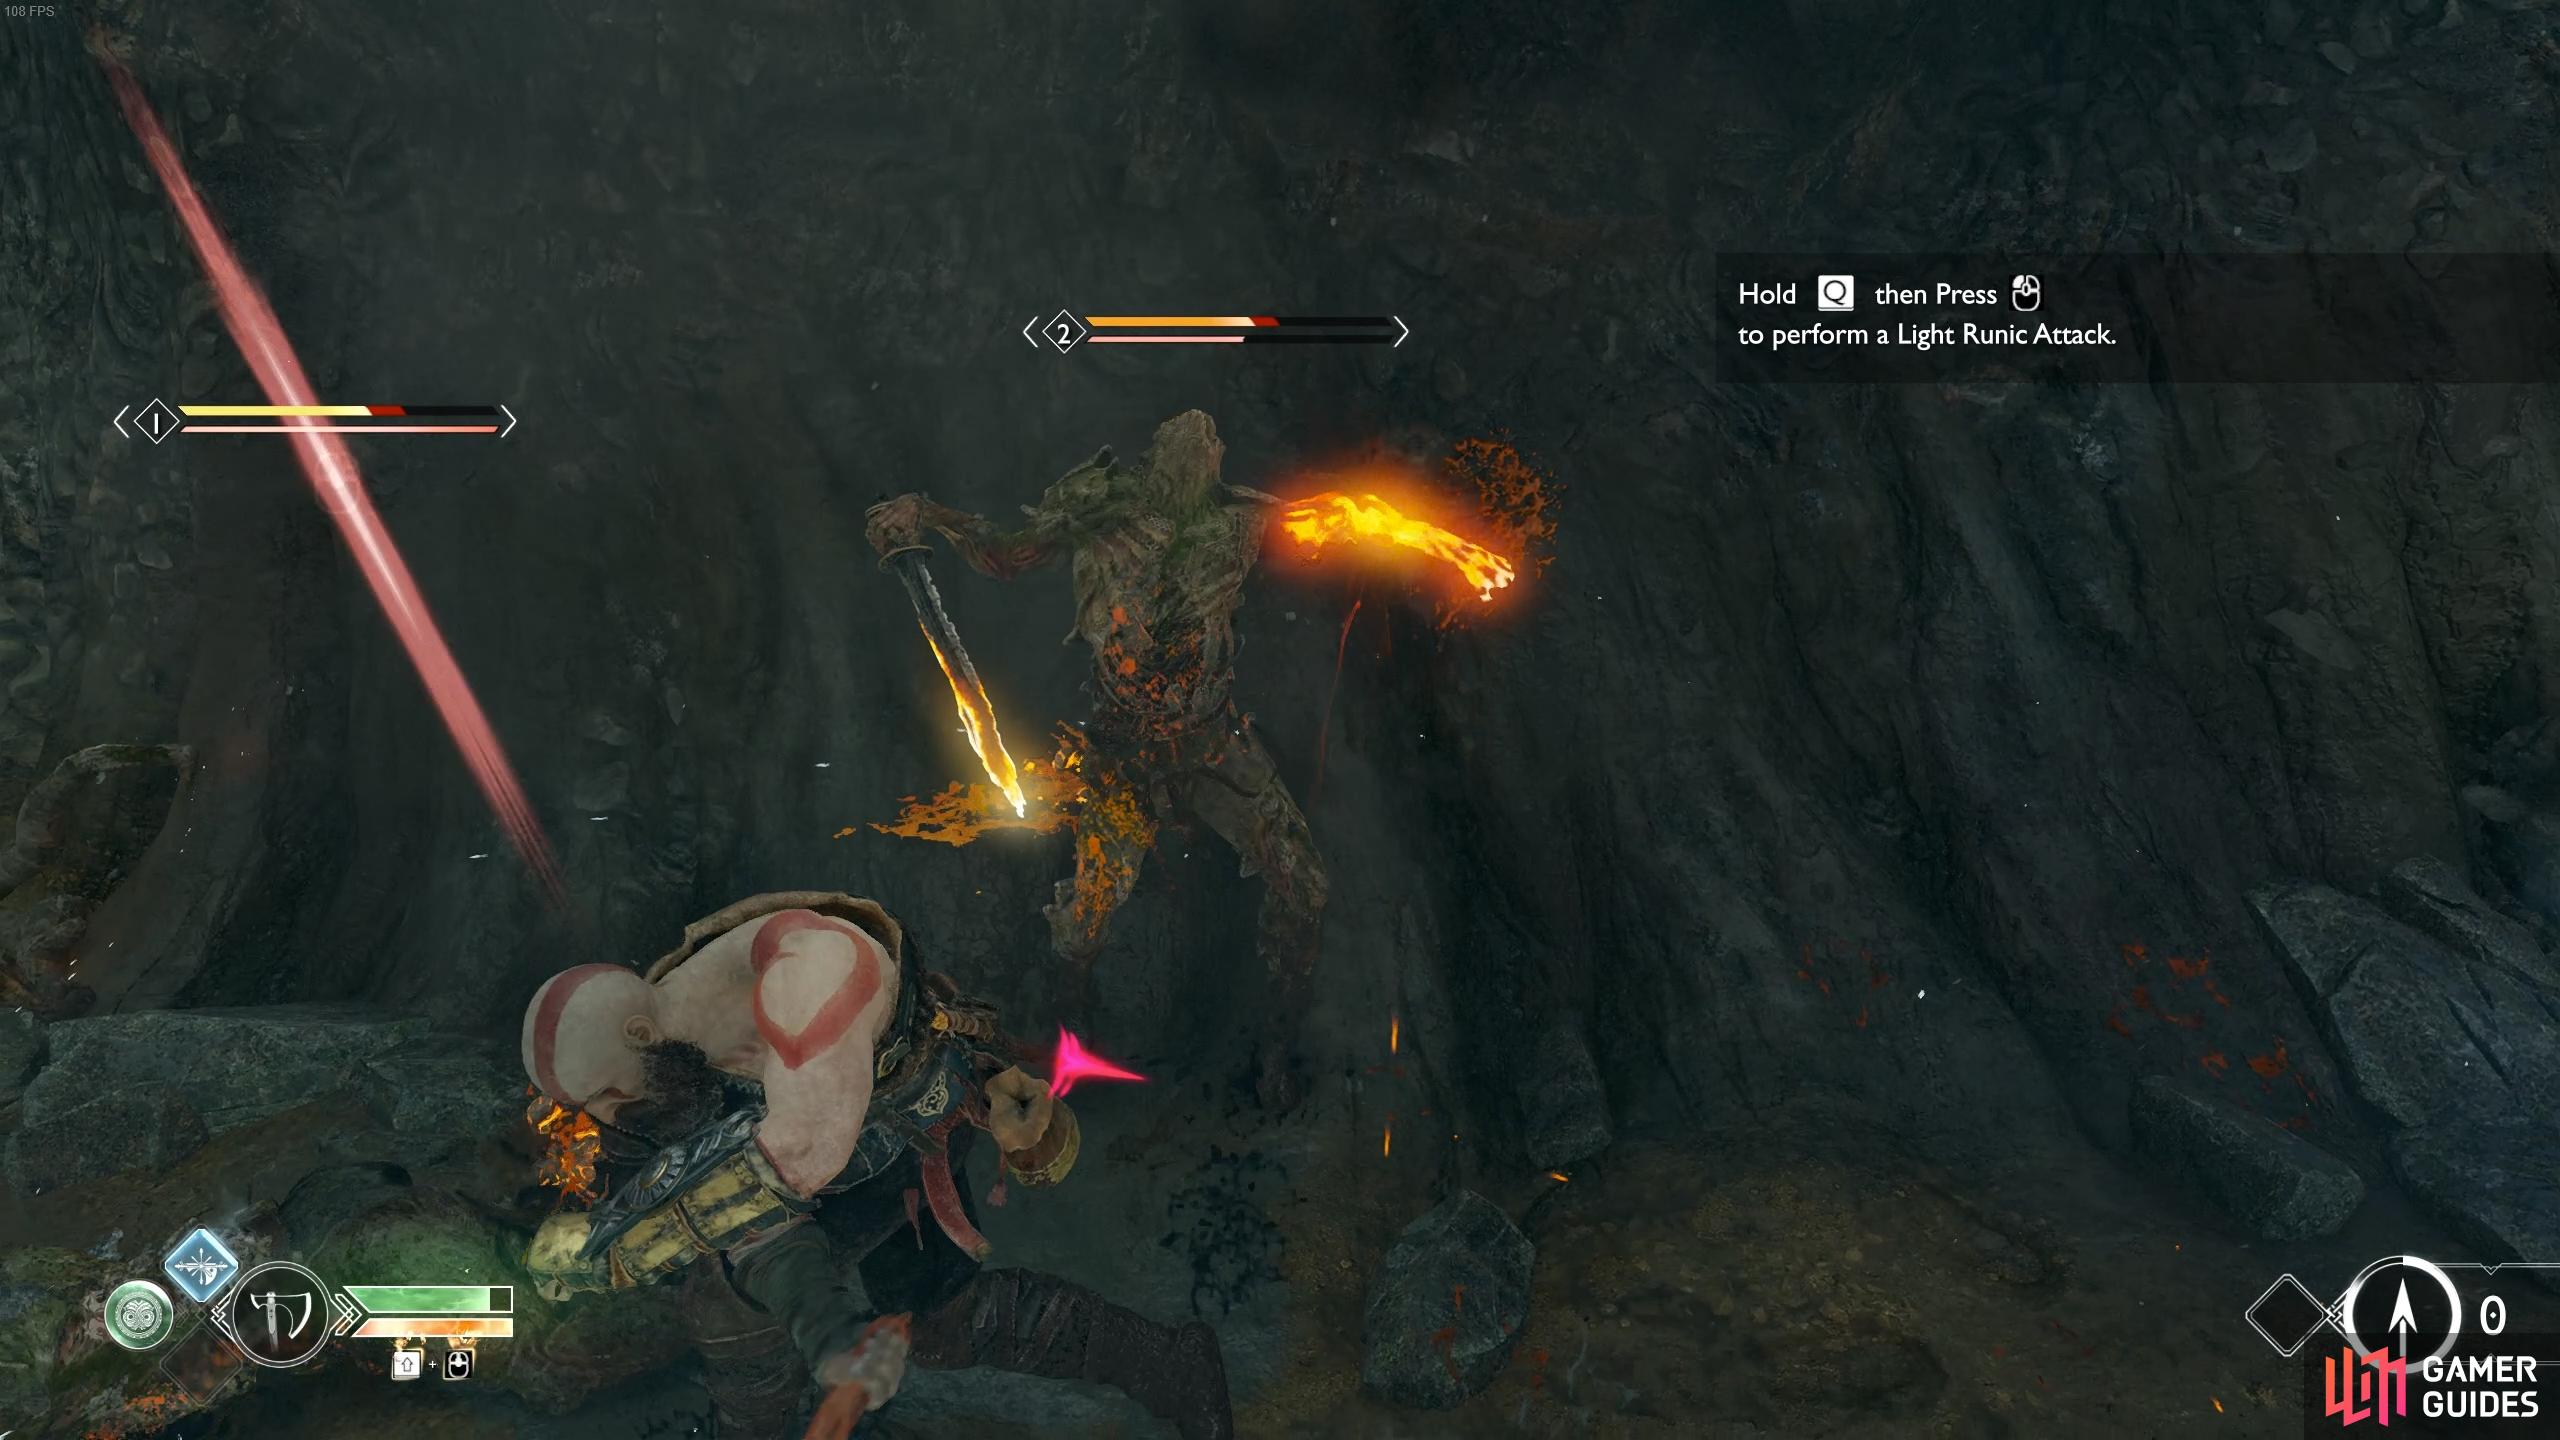 Focus on killing the ranged projectile Draugr first.